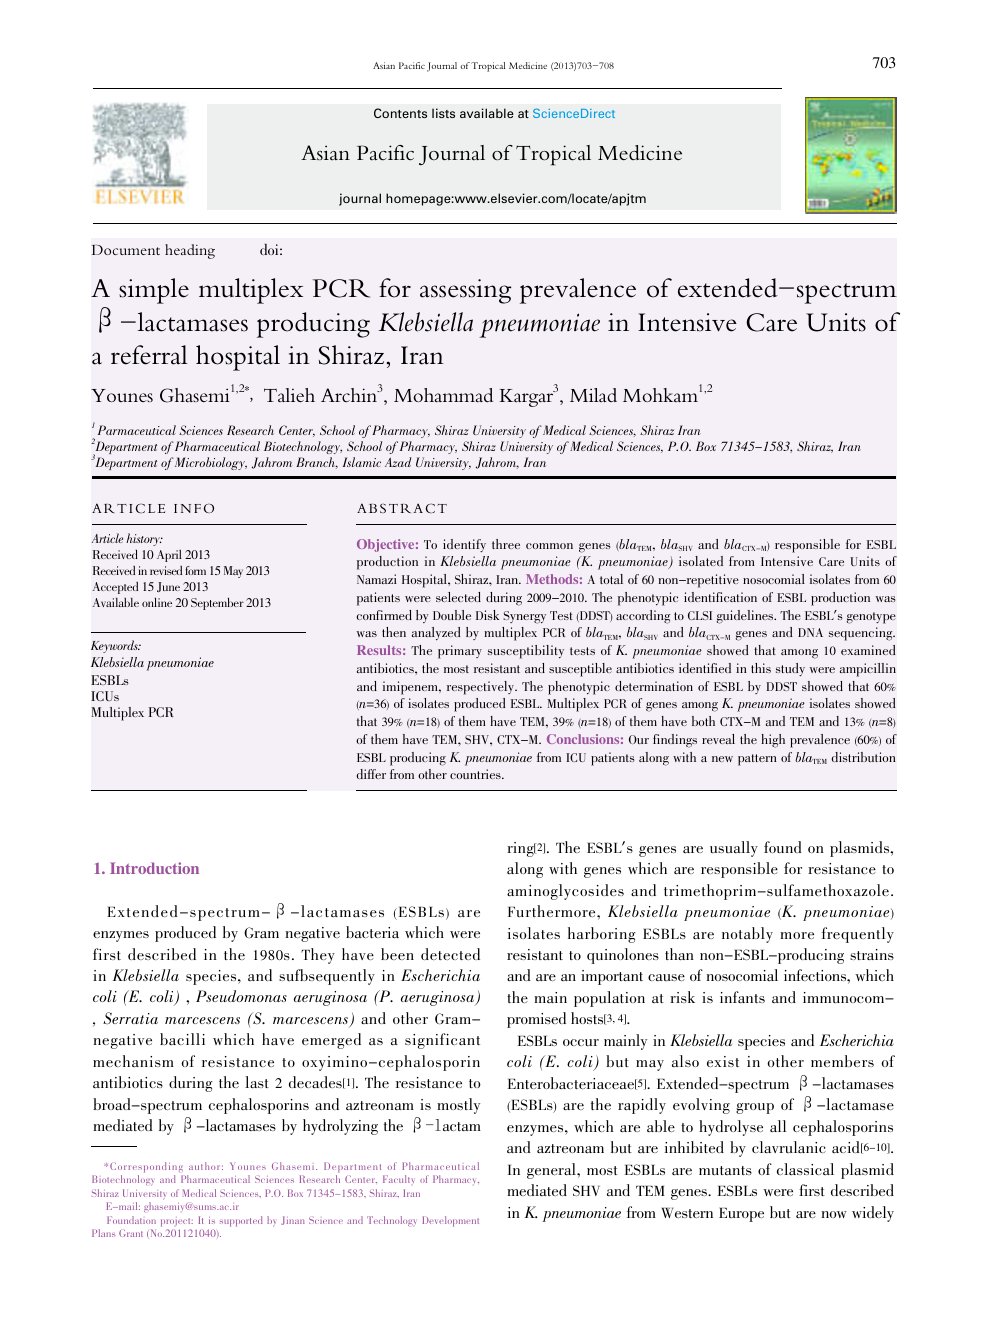 A Simple Multiplex Pcr For Assessing Prevalence Of Extended Spectrum B Lactamases Producing Klebsiella Pneumoniae In Intensive Care Units Of A Referral Hospital In Shiraz Iran Topic Of Research Paper In Biological Sciences